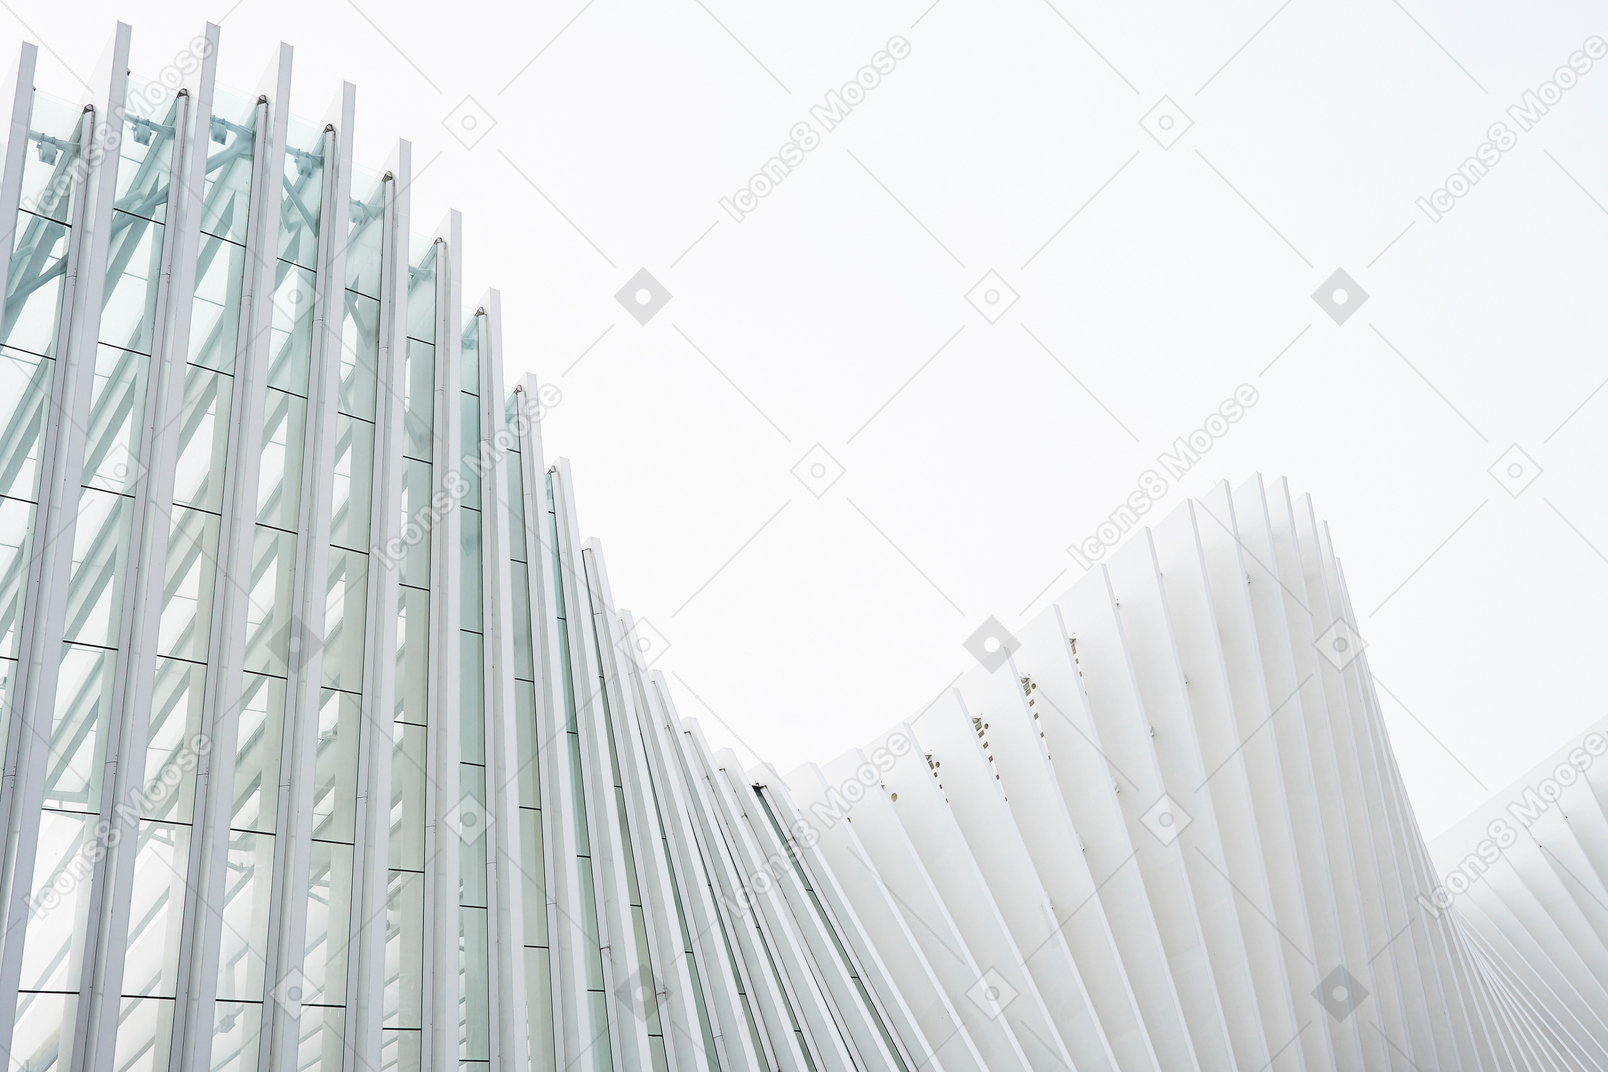 Building facade with concrete ribs and glass